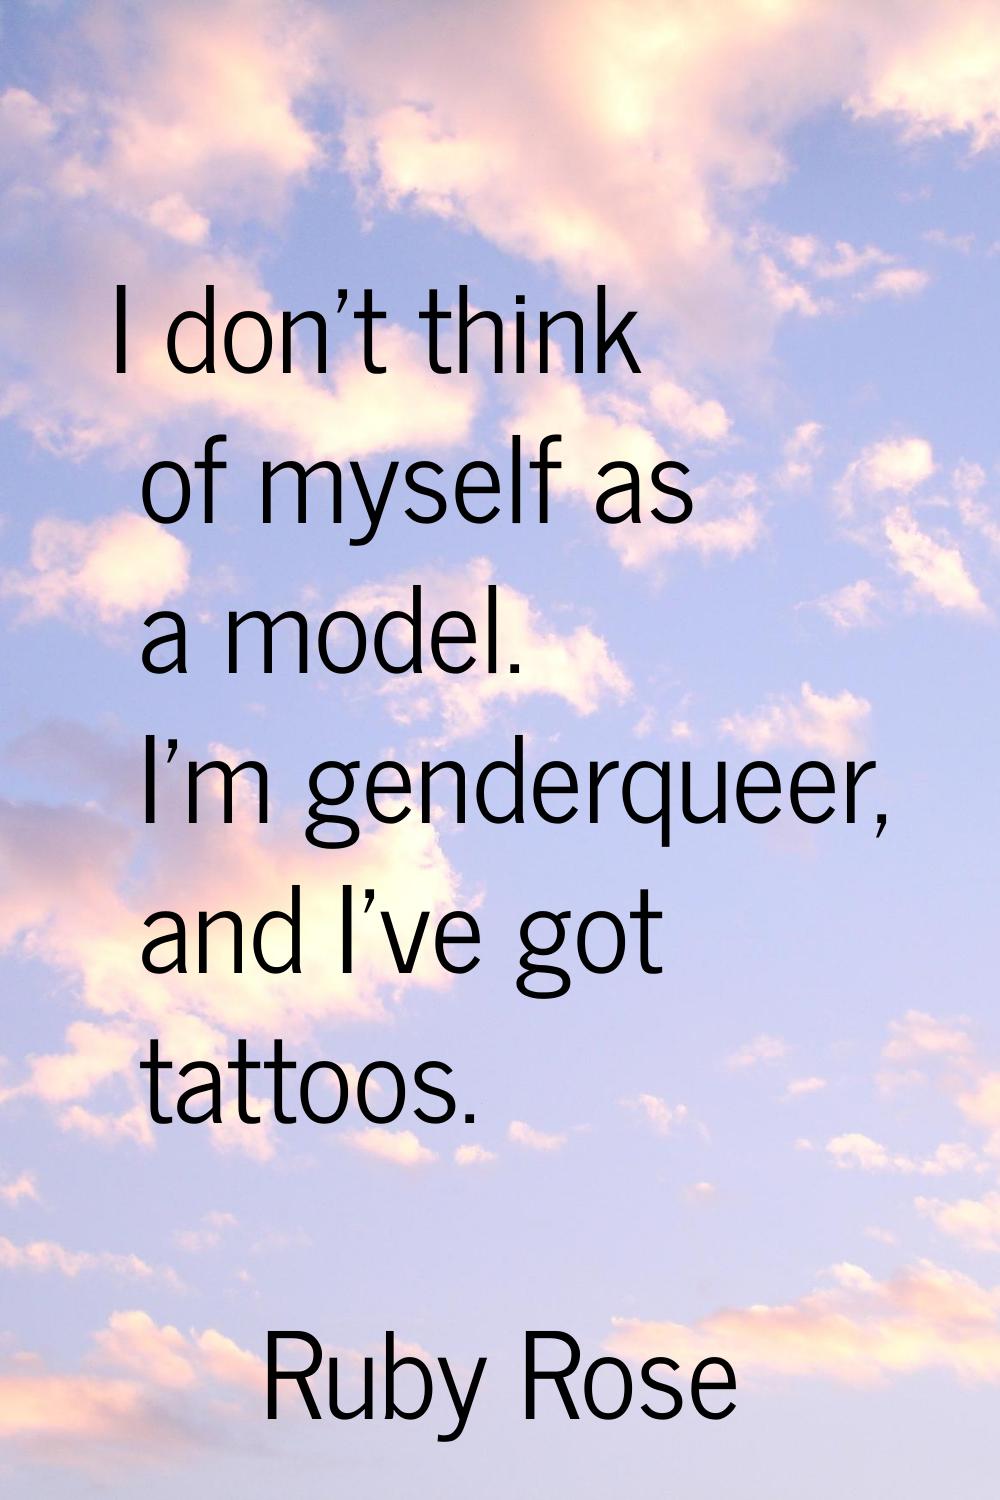 I don't think of myself as a model. I'm genderqueer, and I've got tattoos.